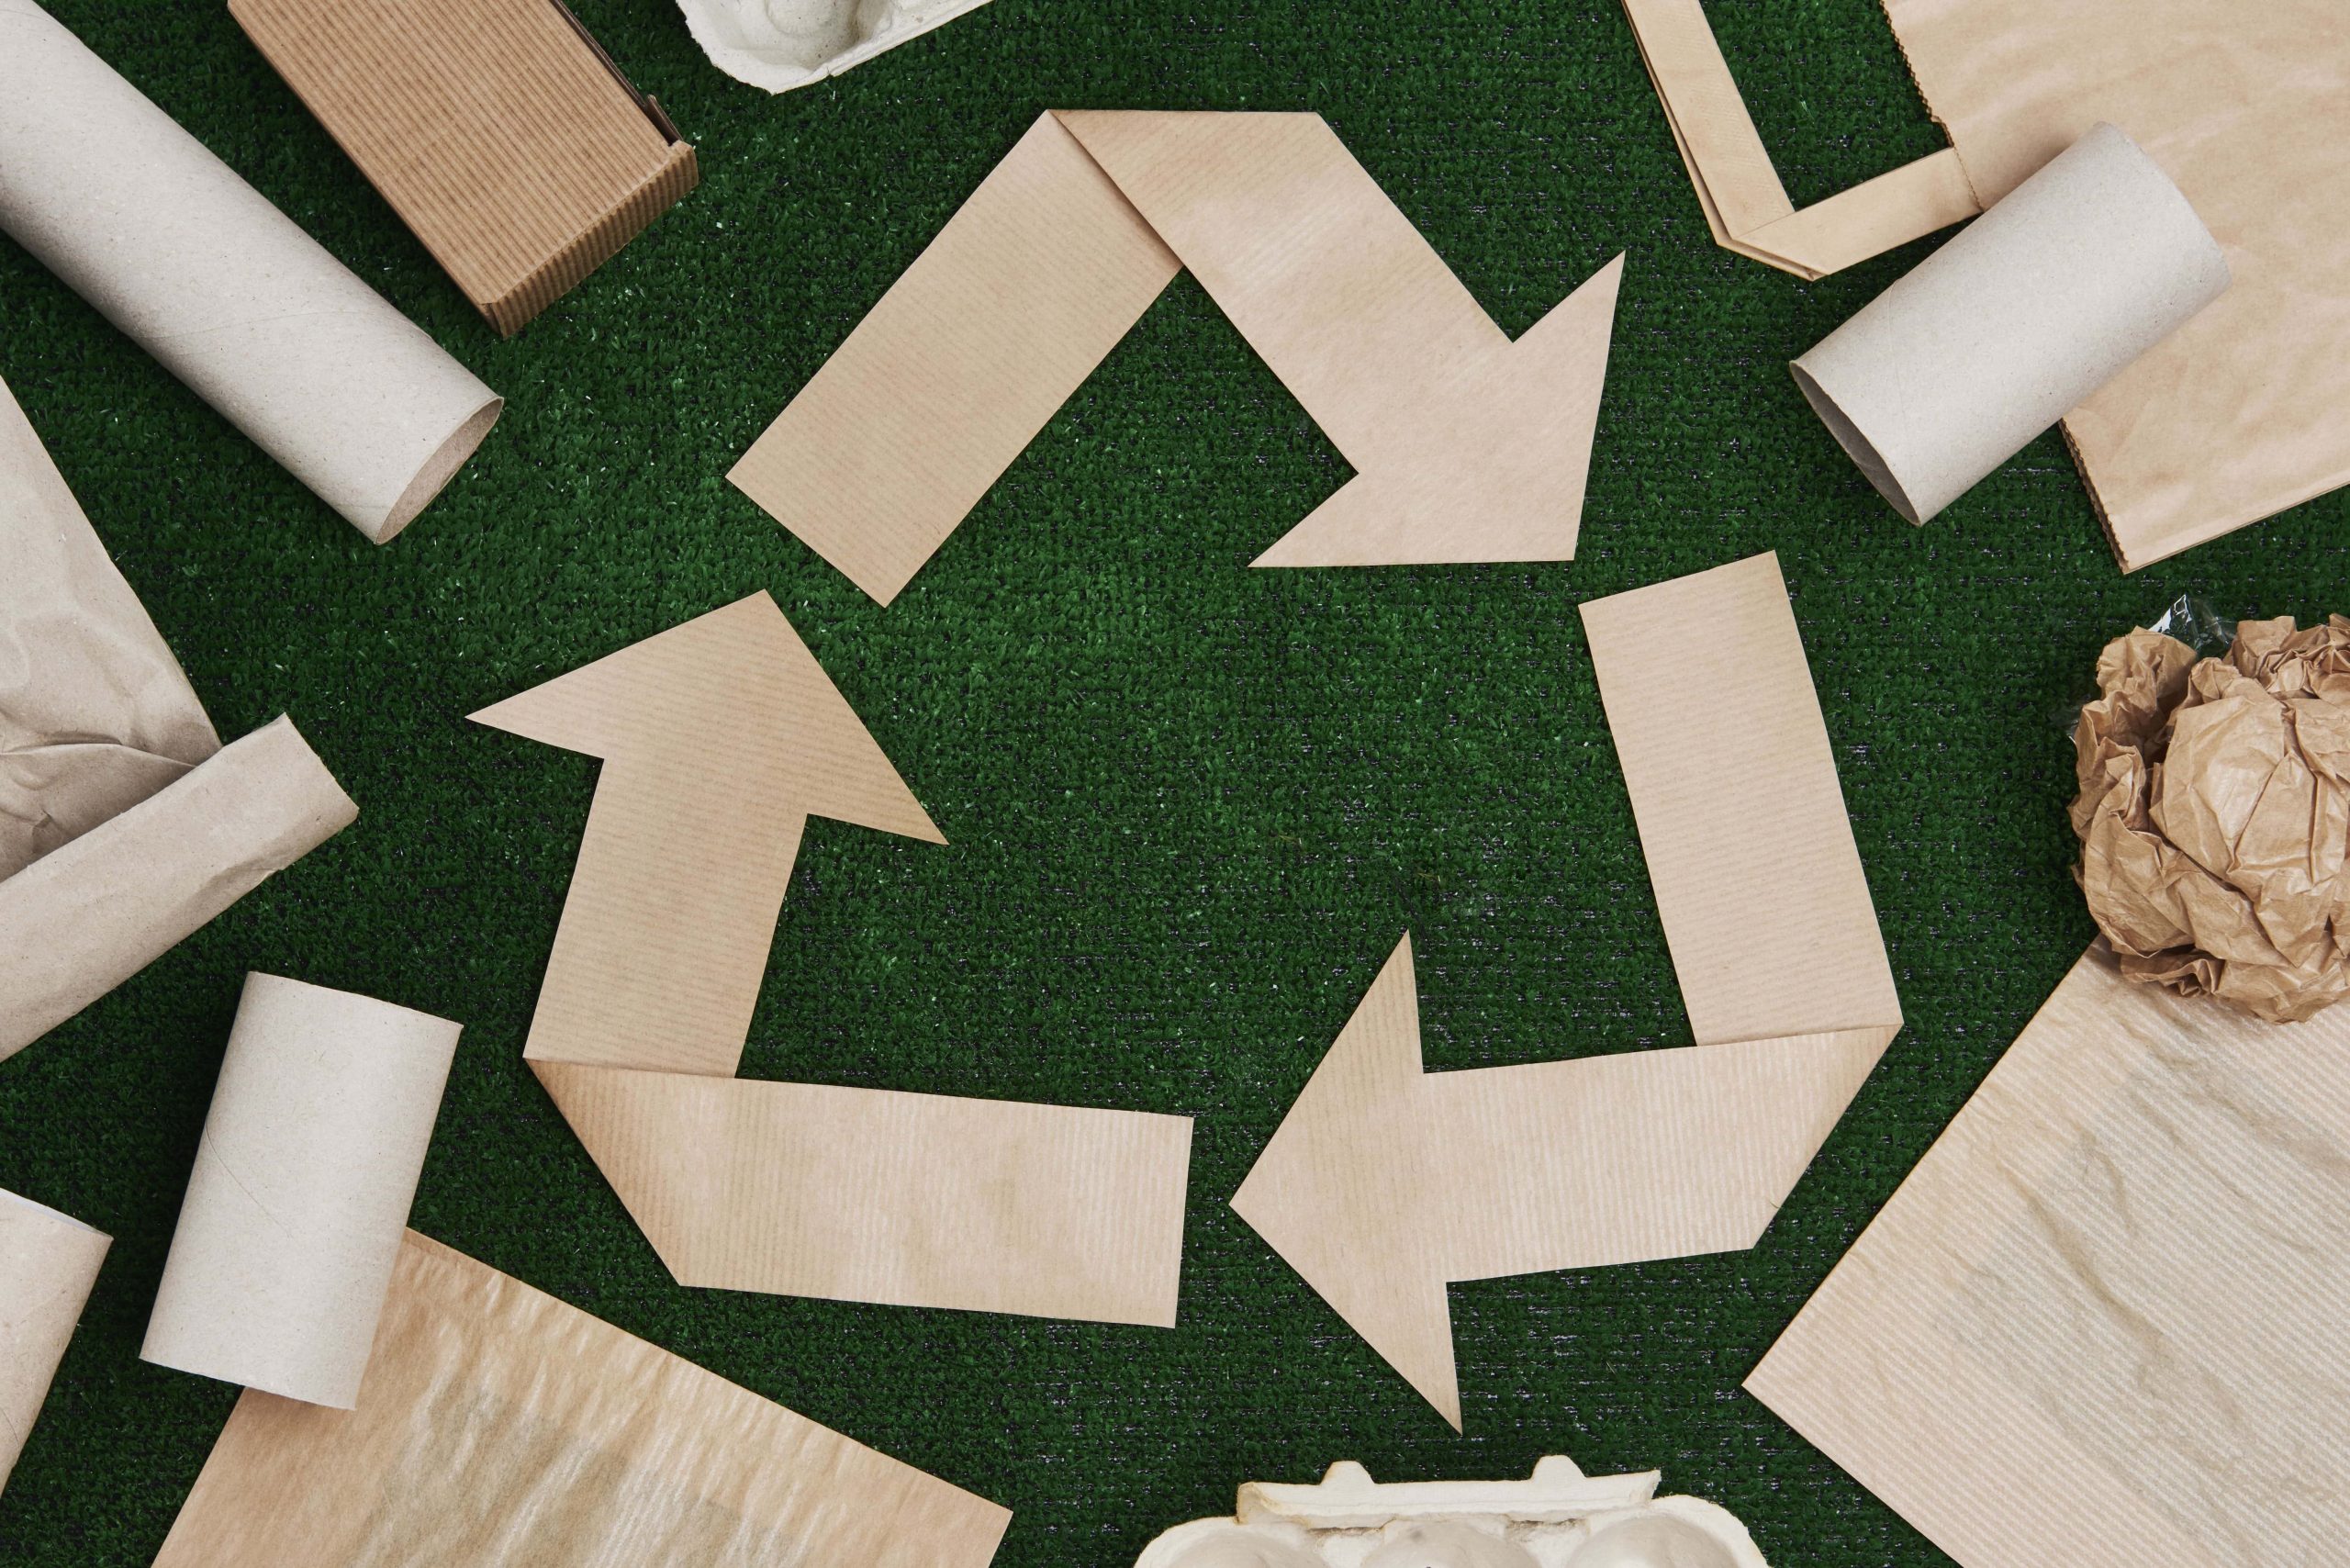 Paper recycling guide: Advantages and requirements › Evreka